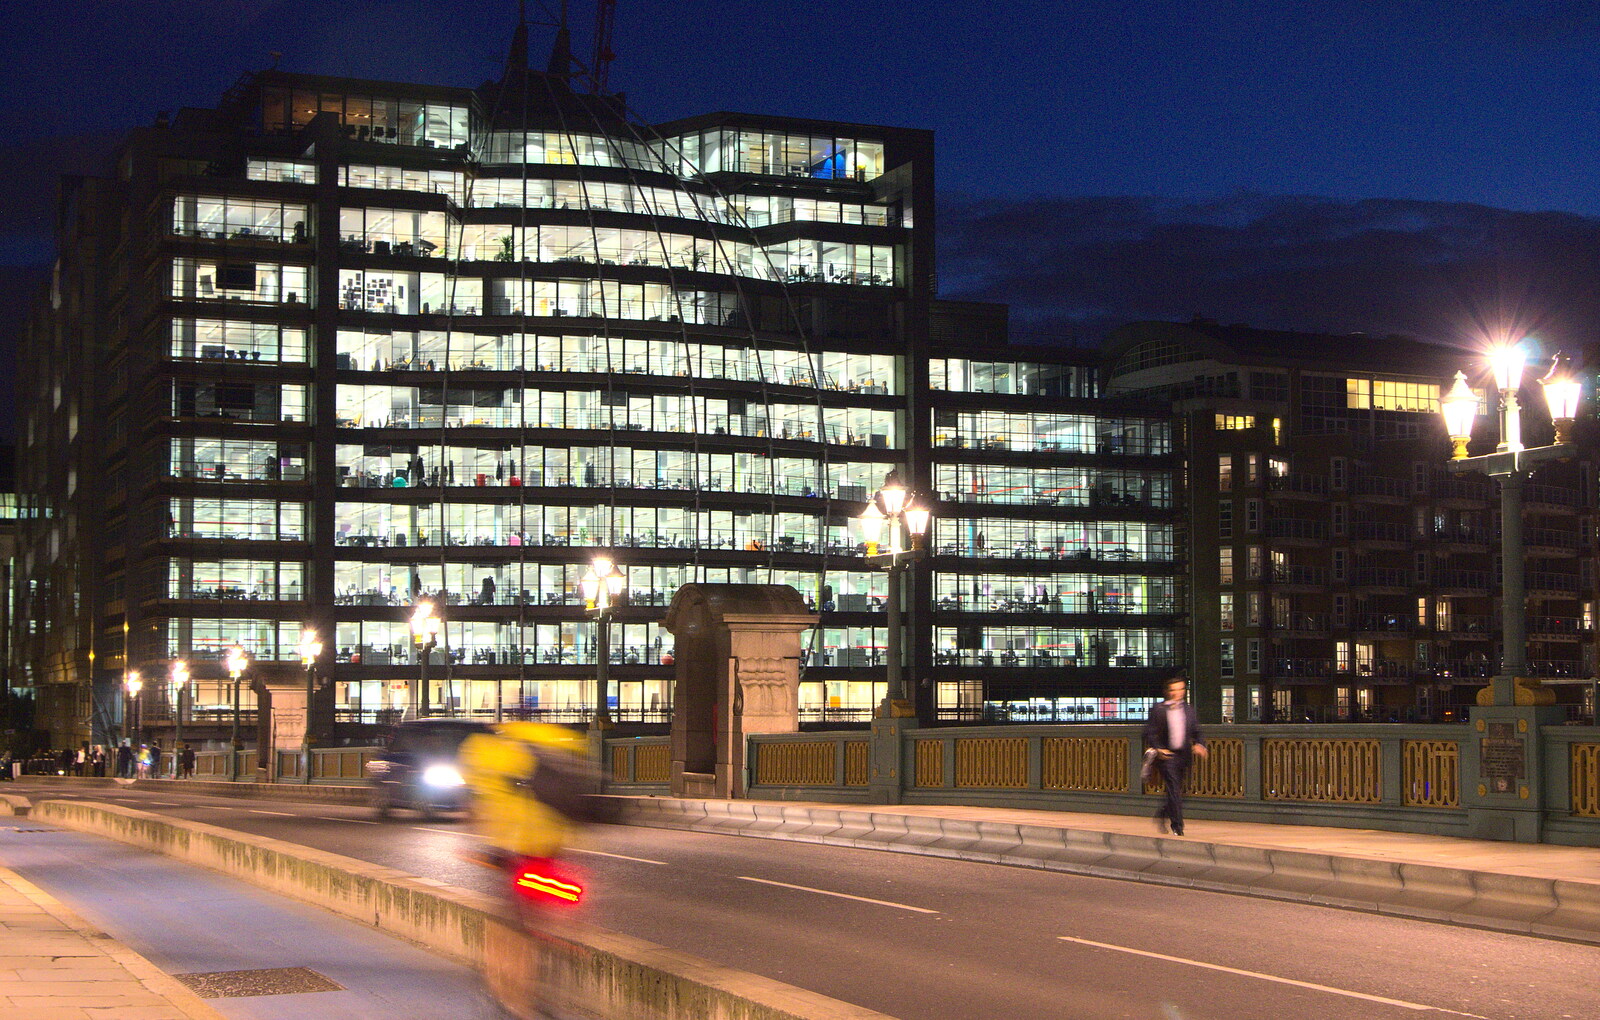 The Financial Times building from SwiftKey Innovation Week, Southwark Bridge Road, London - 7th October 2015